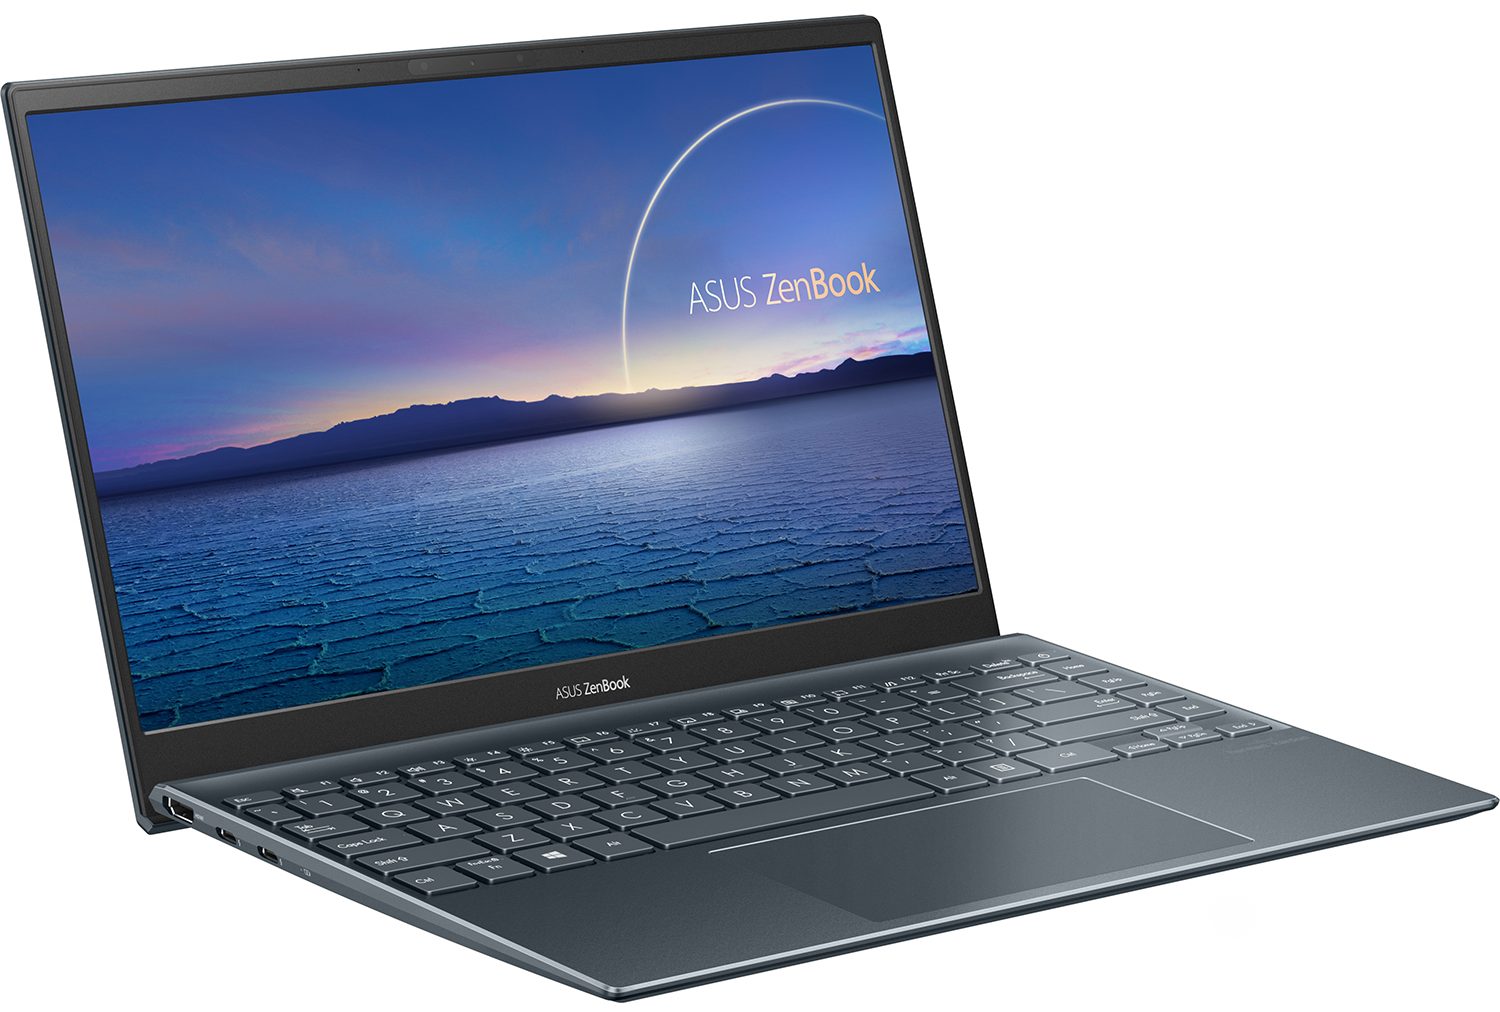 ASUS ZenBook 14 UX425 (BX425) - Specs, Tests, and Prices 